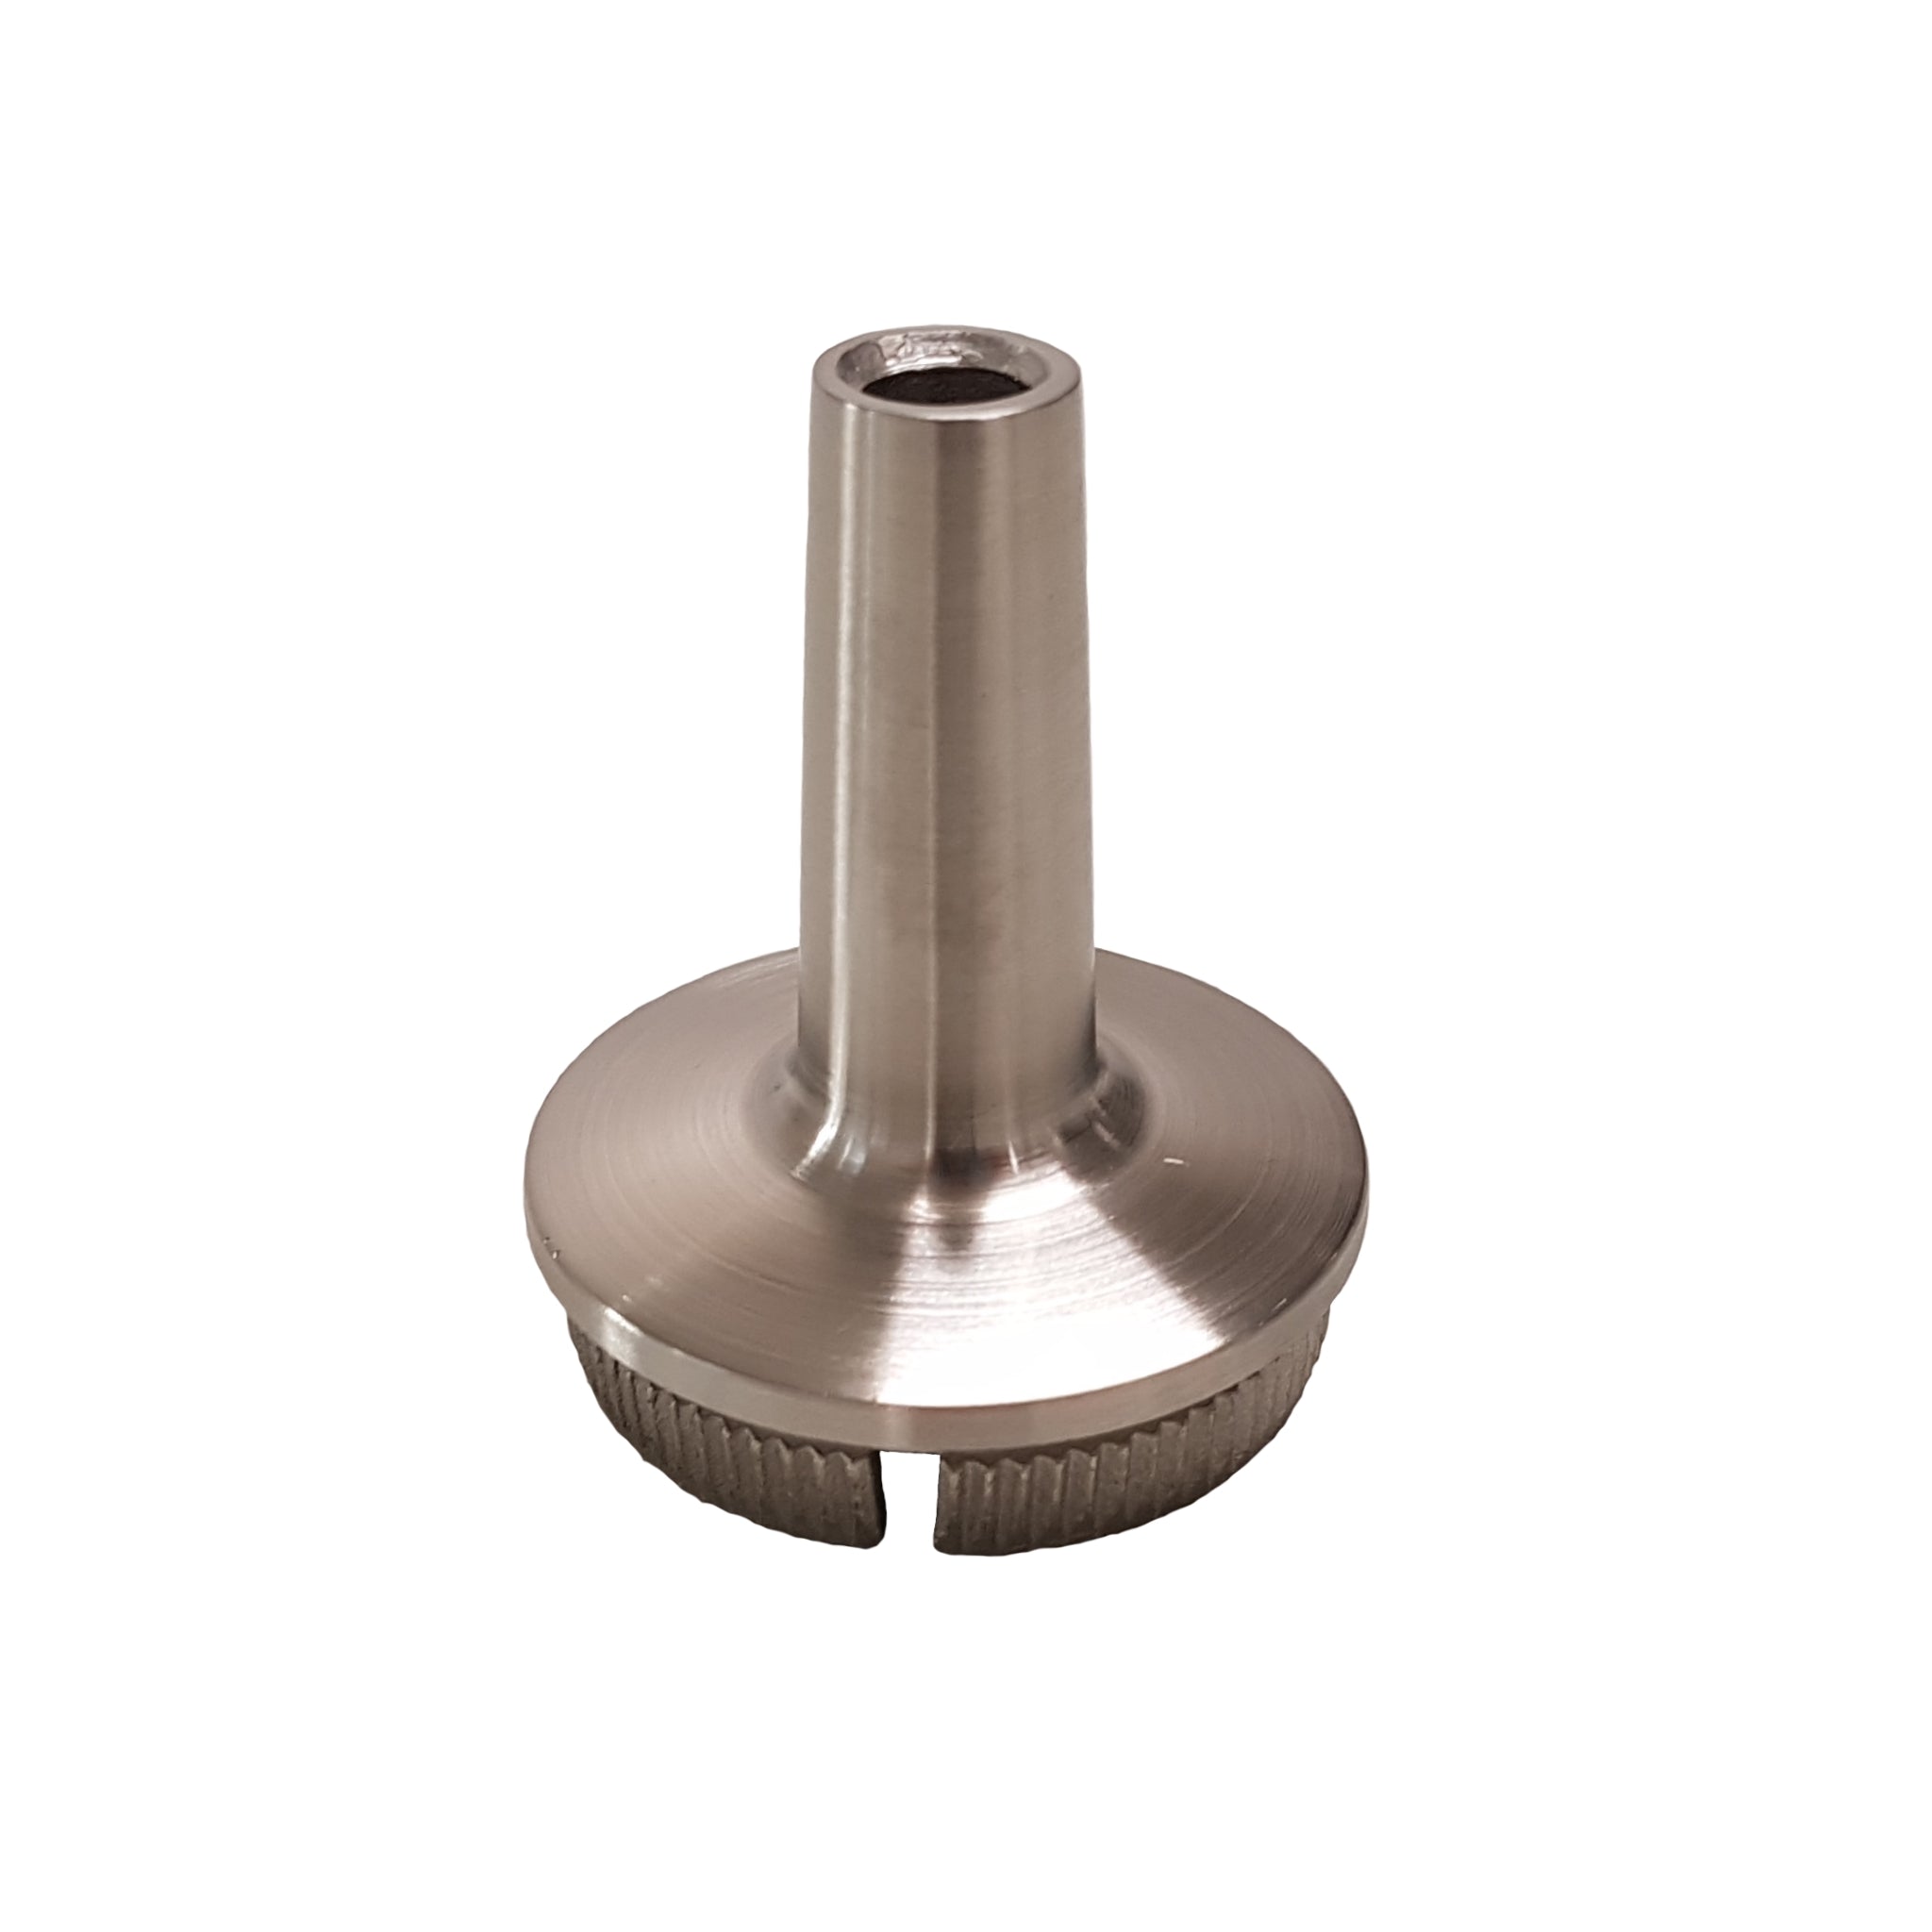 50.8mm Round - Rail Converter - Stainless Steel Products